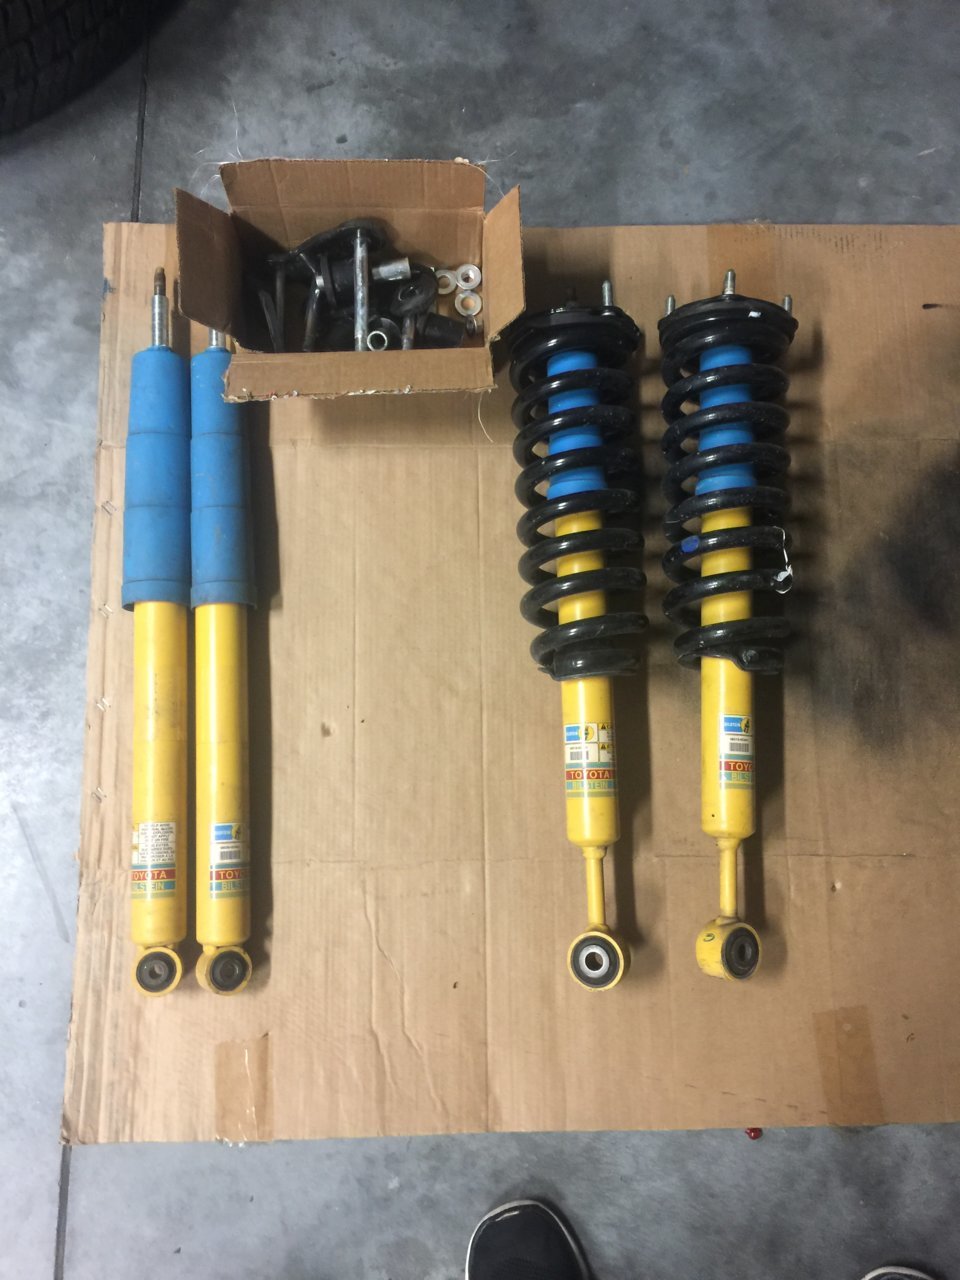 OEM Front and Rear Shocks - 2018 TRD Off Road | Toyota Tundra Forum